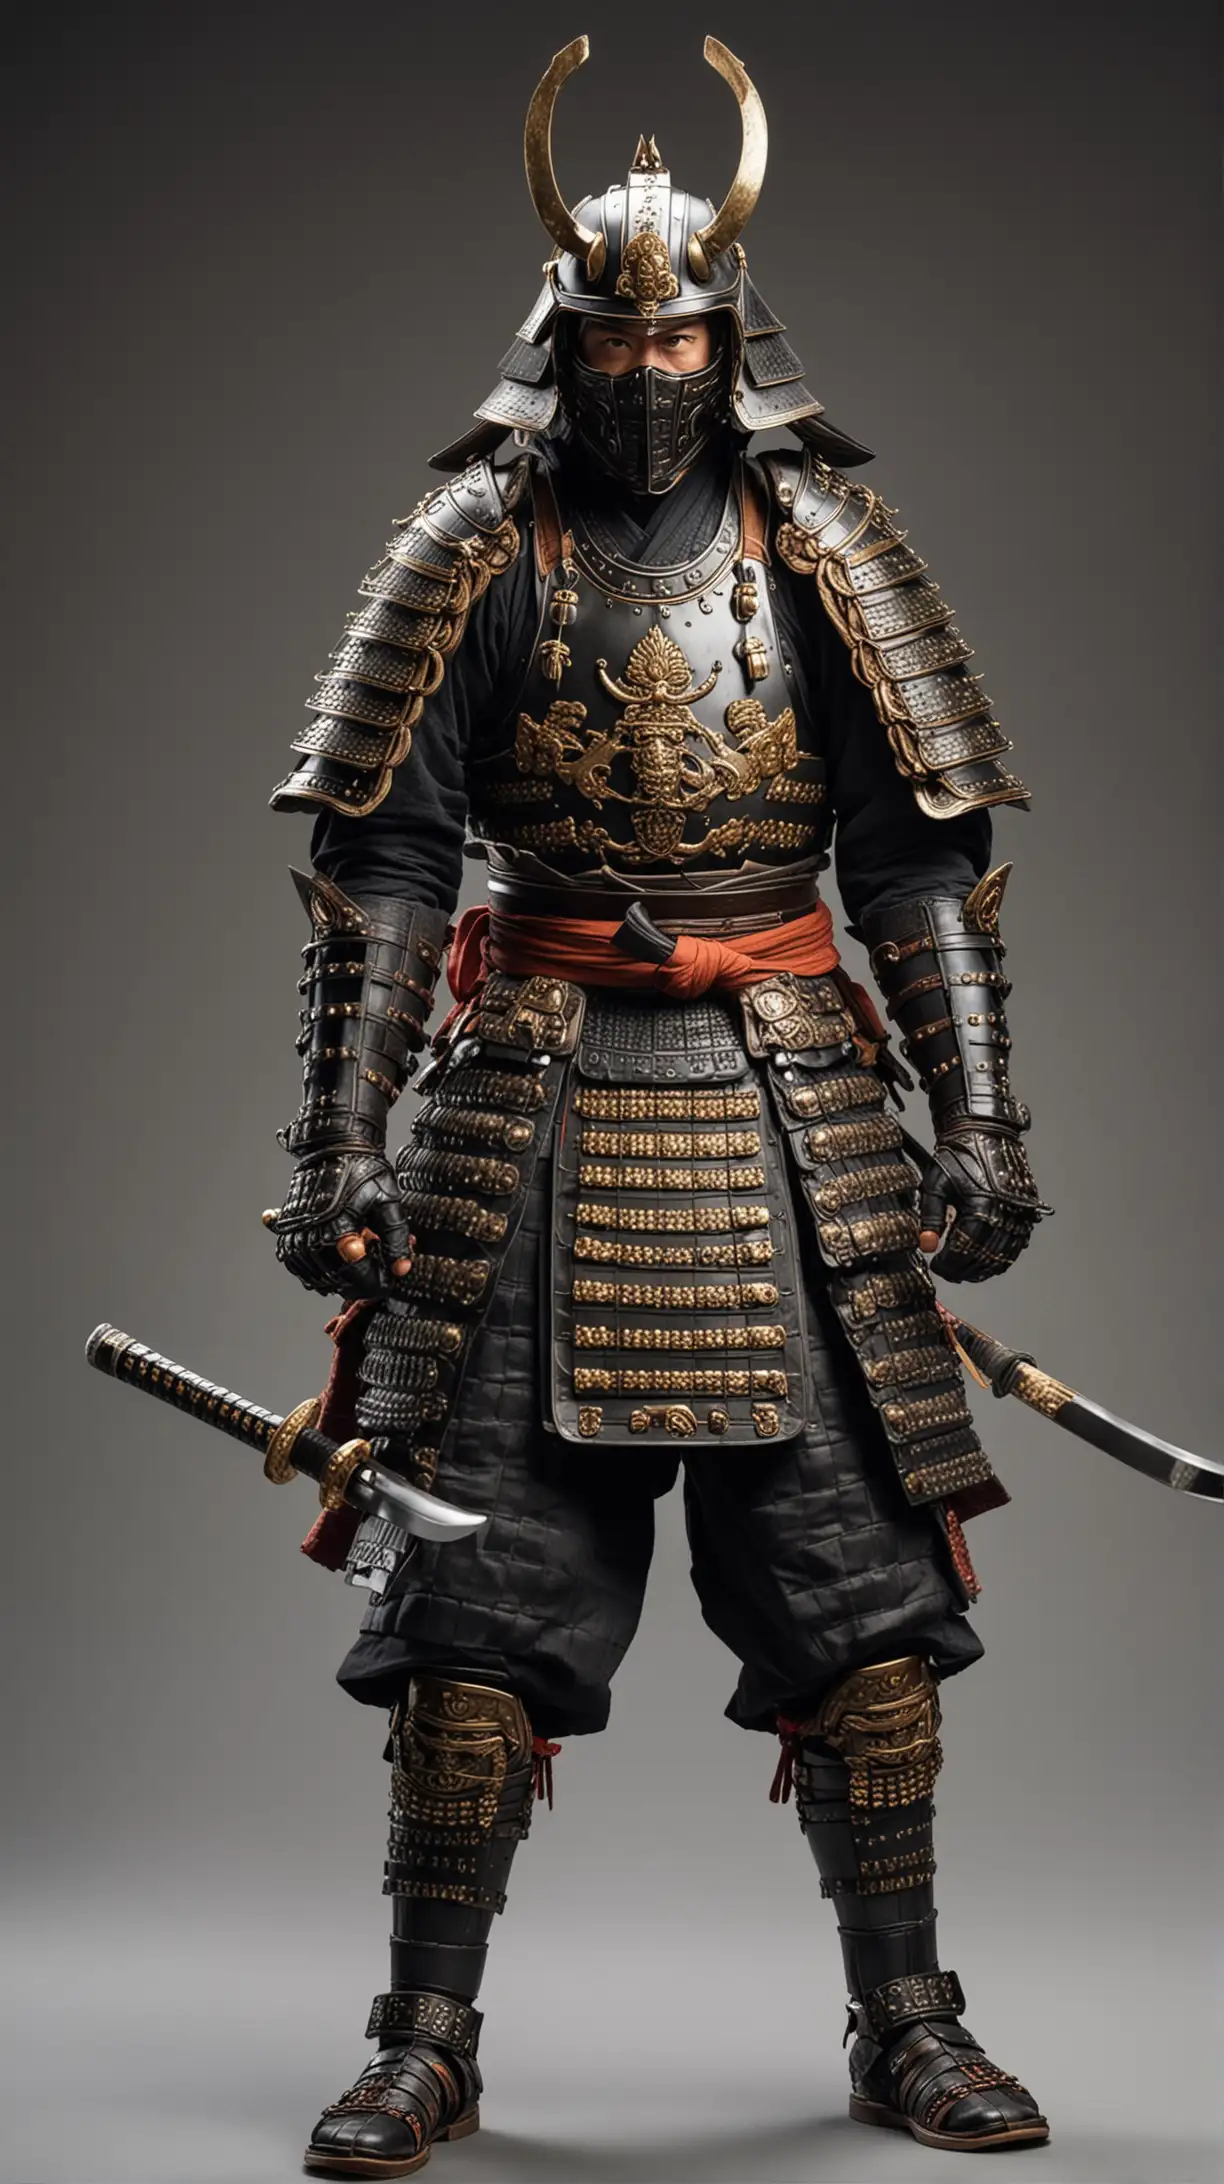 Samurai in Full Armor: Depict a samurai in traditional o-yoroi armor, complete with a kabuto helmet, intricate metal and leather plates, and a fierce expression, standing in a battle-ready pose.